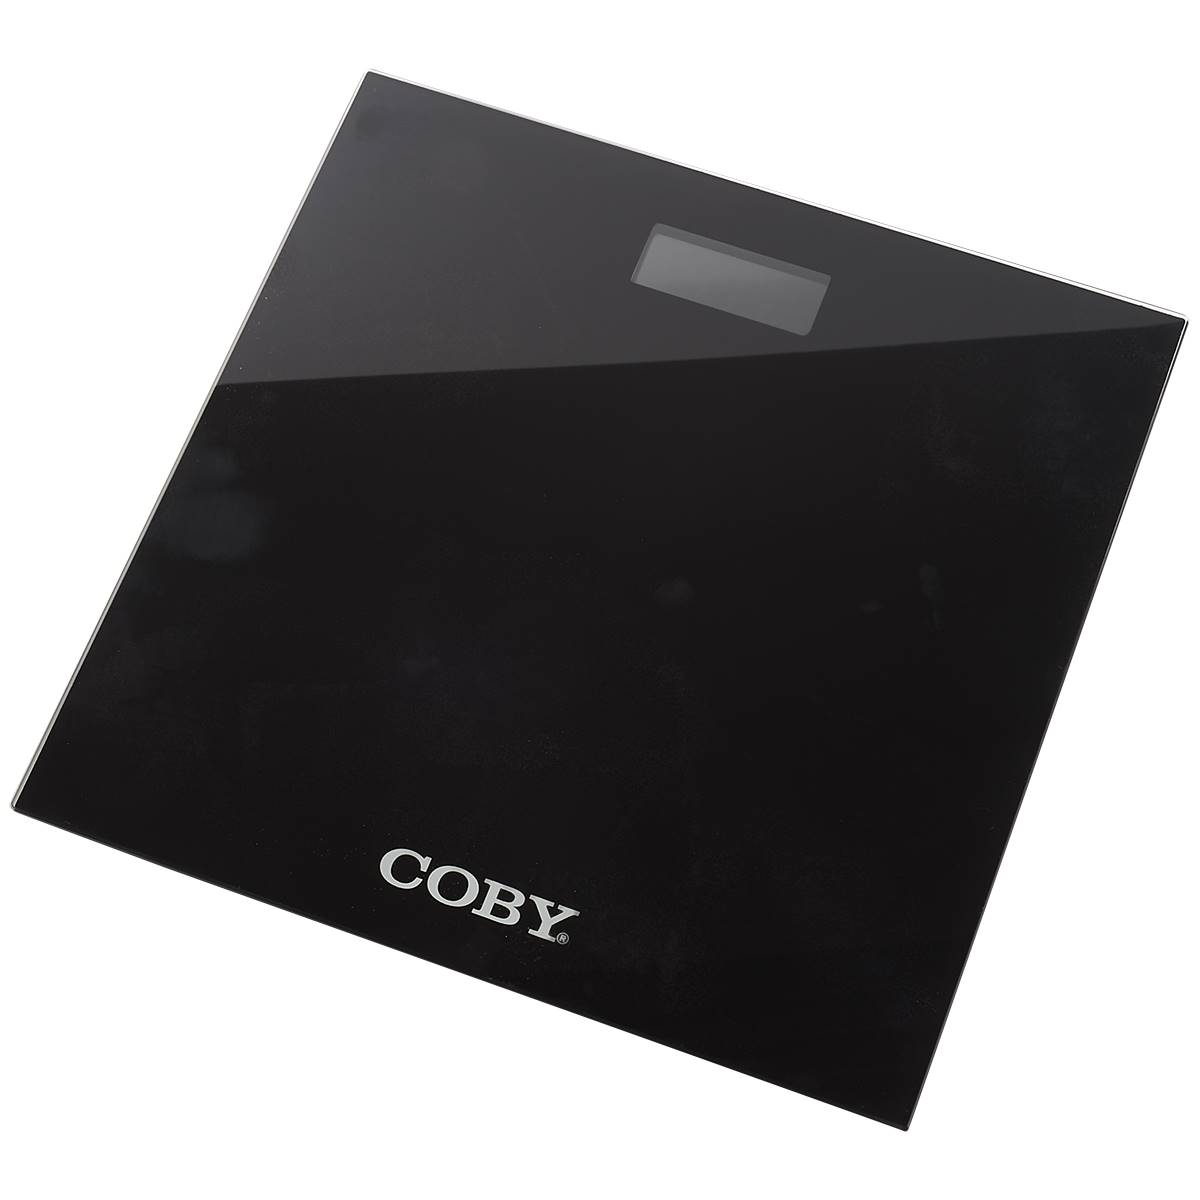 Coby Digital Glass Scale - Black